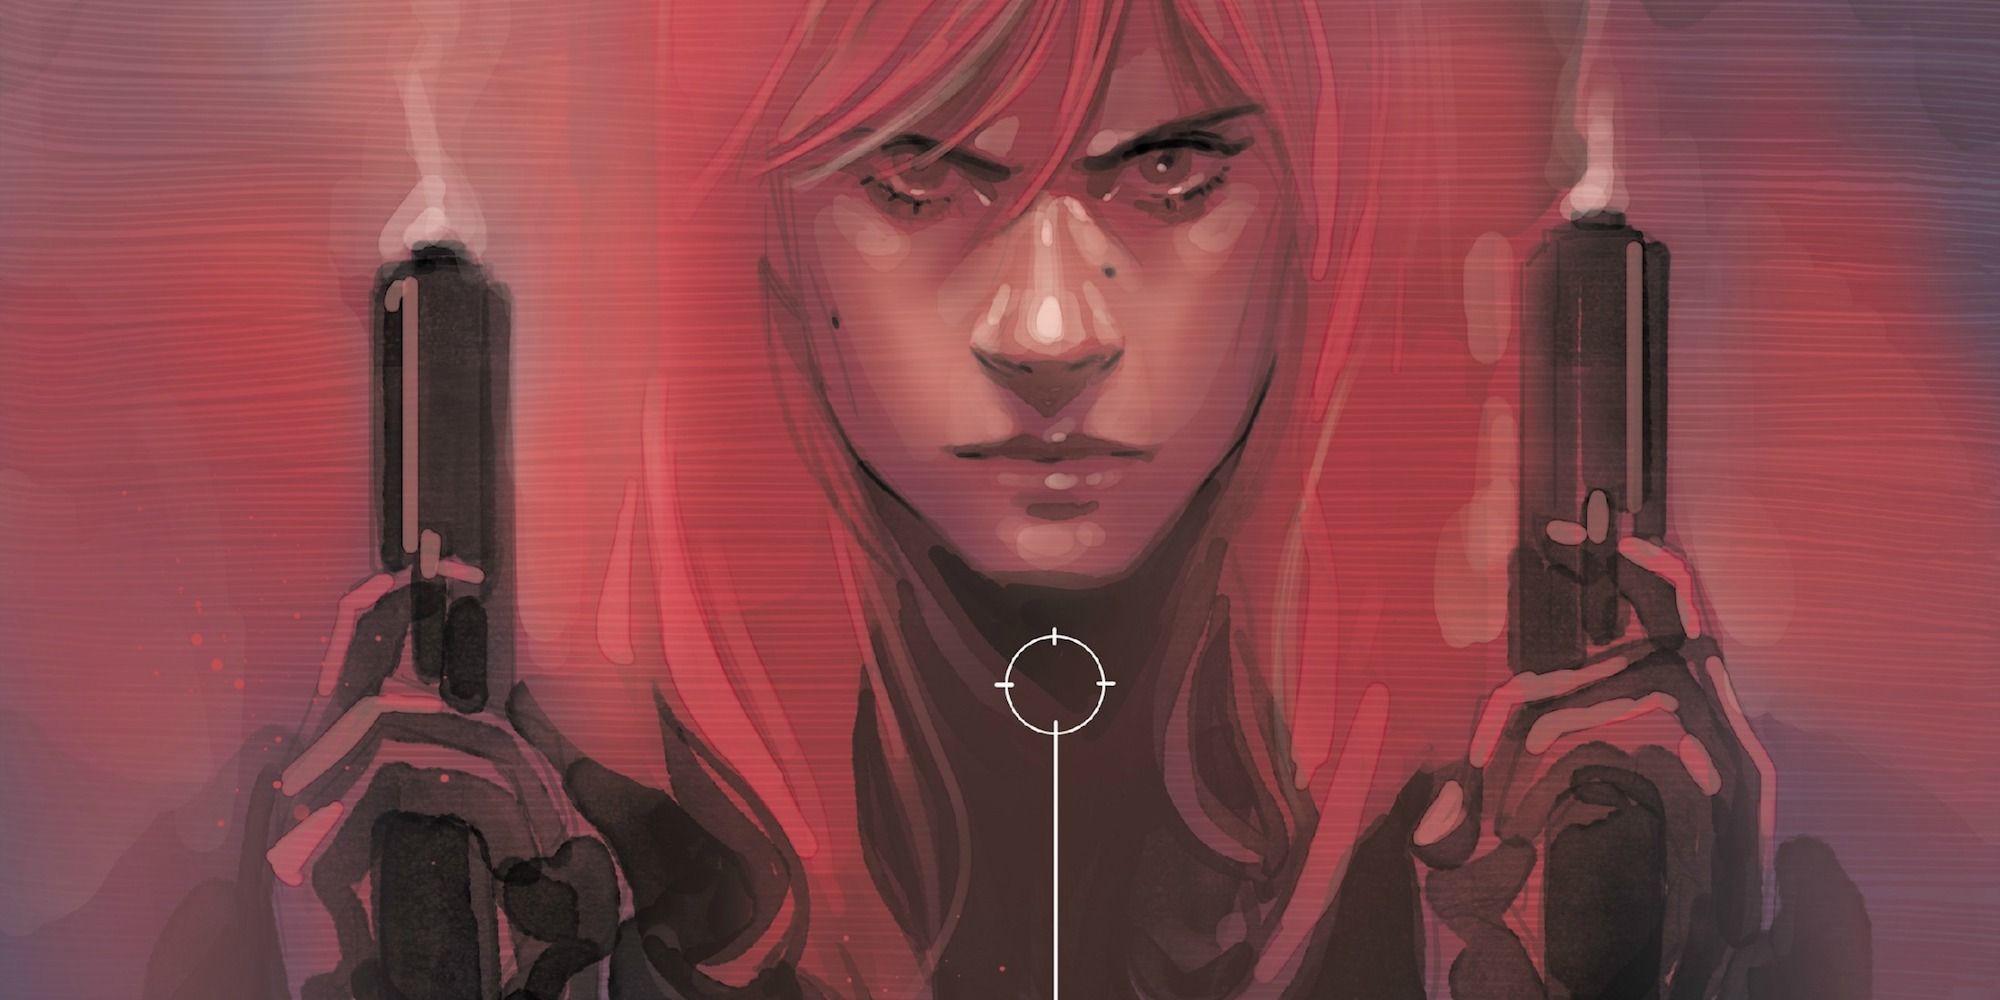 Artwork depicting the Black Widow holding two guns in Marvel comcis